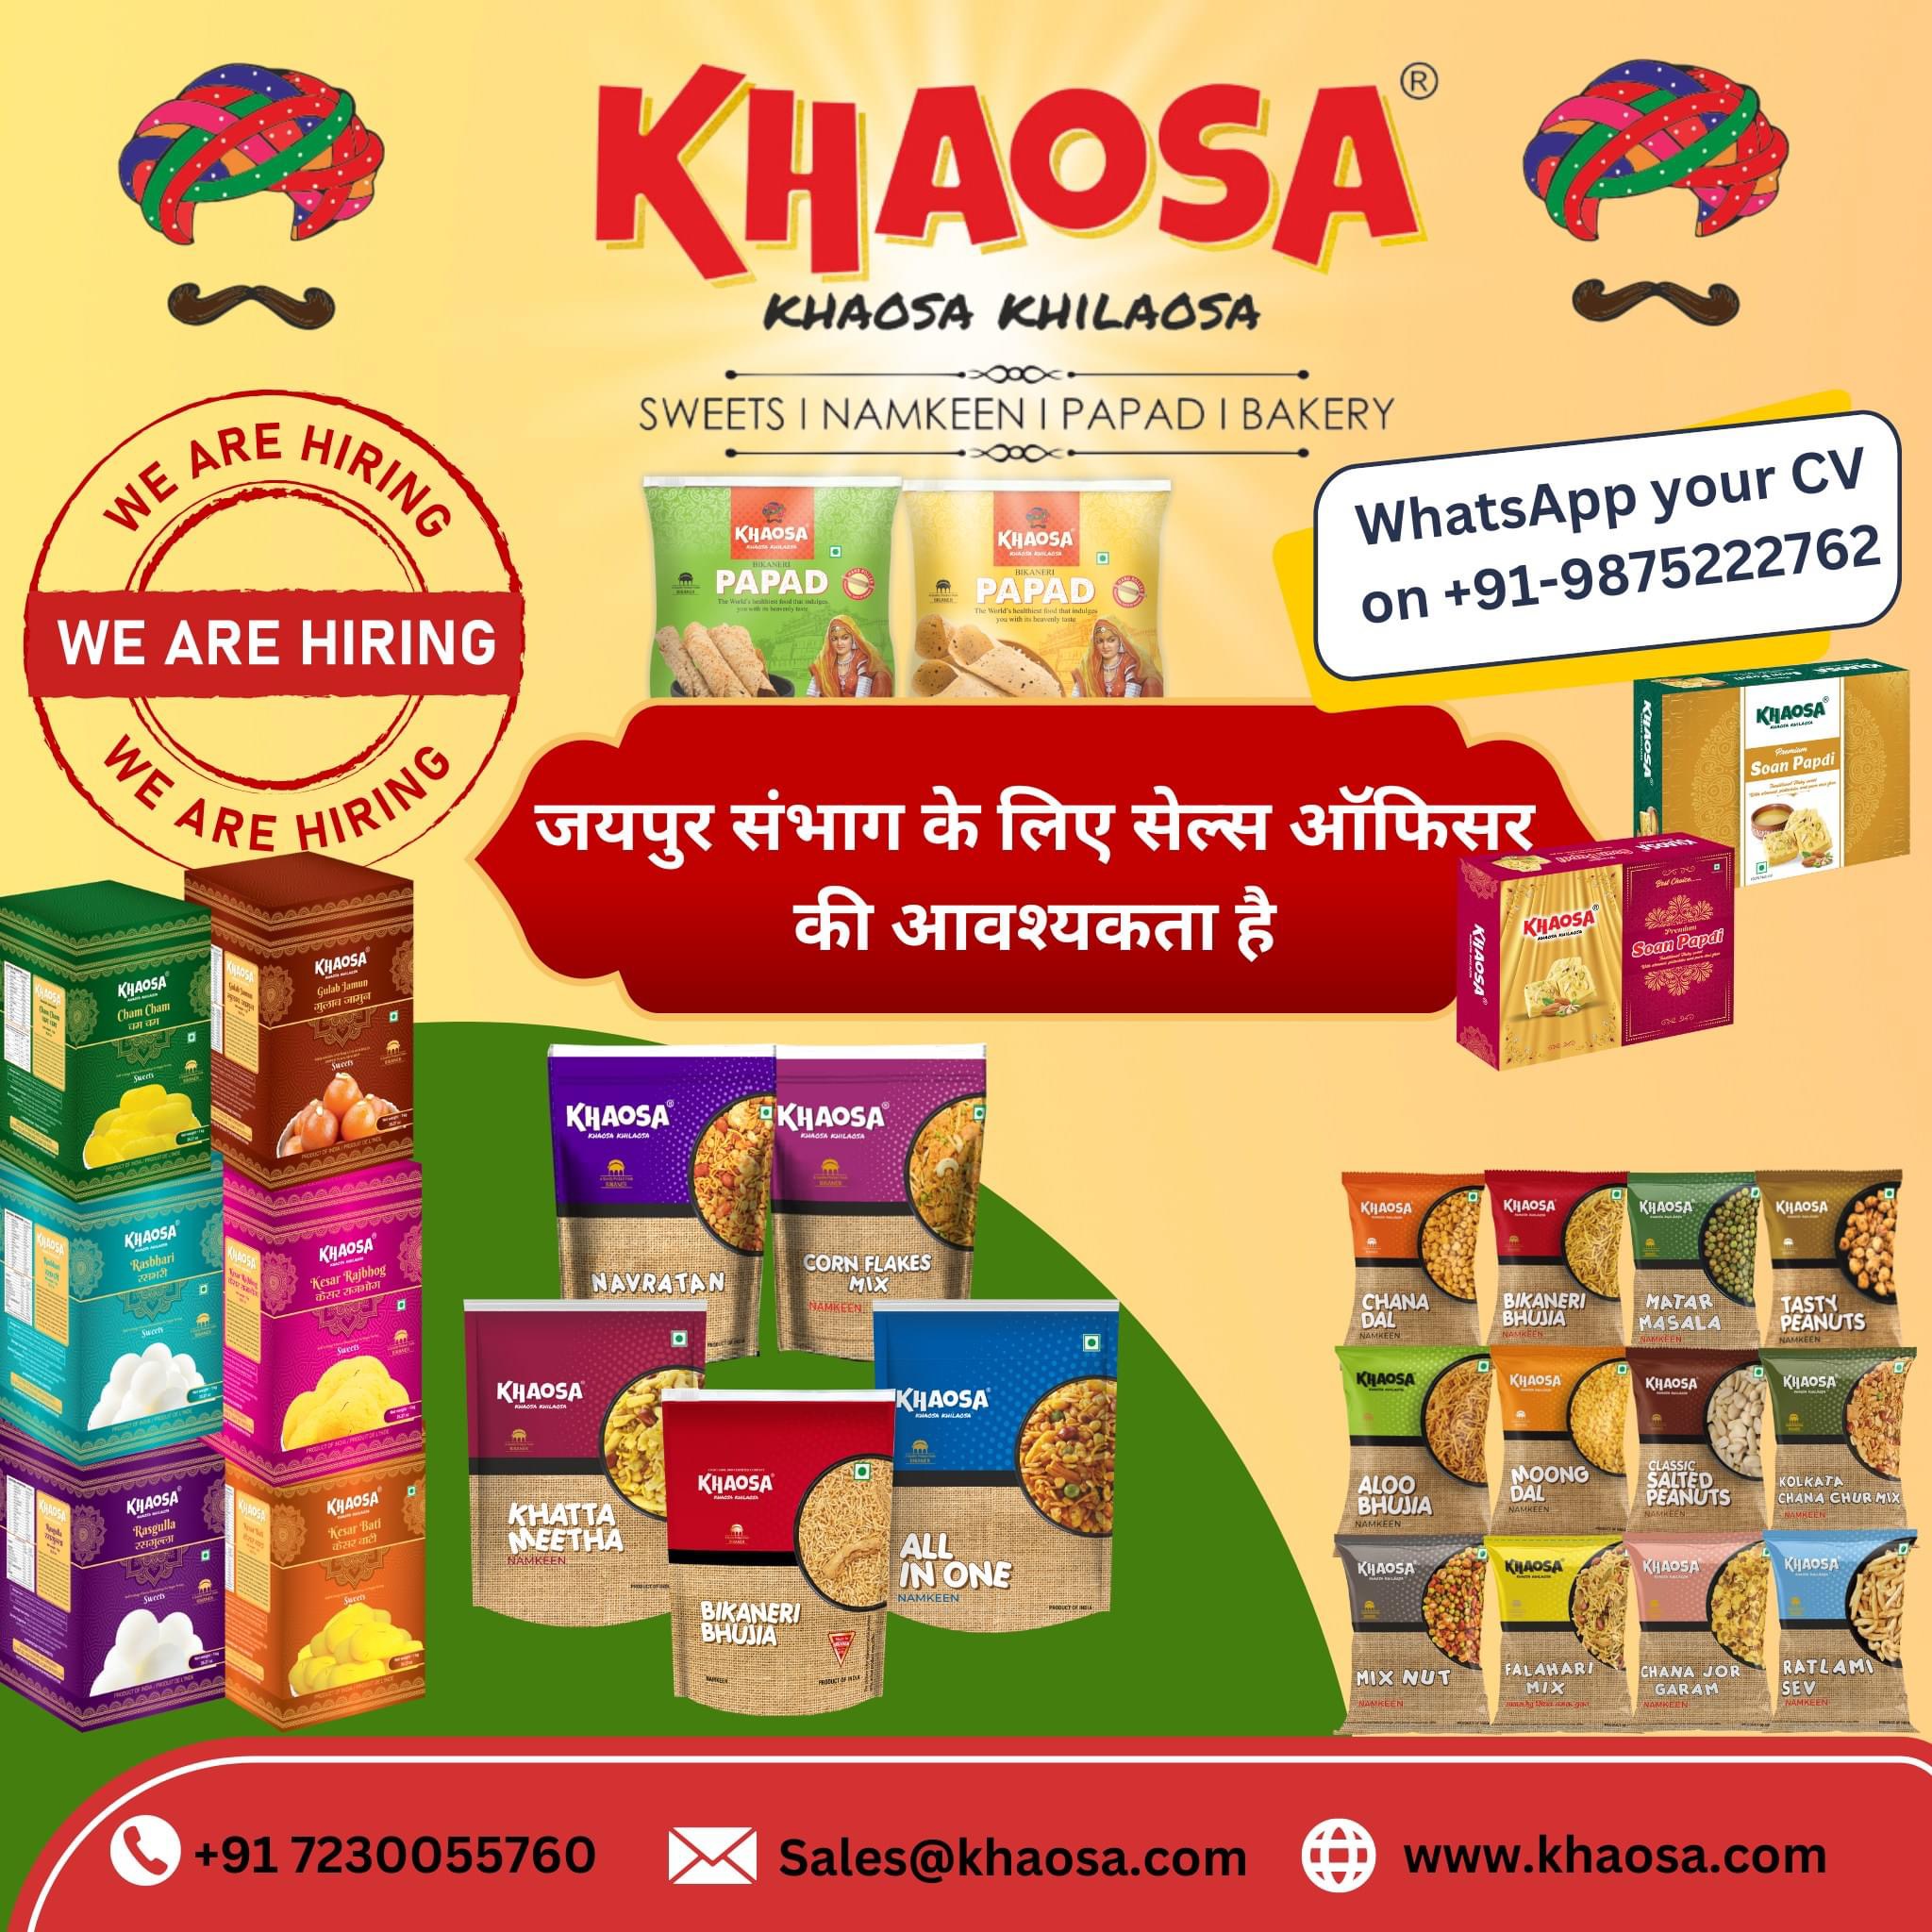 Sales officer Required in FMCG Company for Jaipur Division